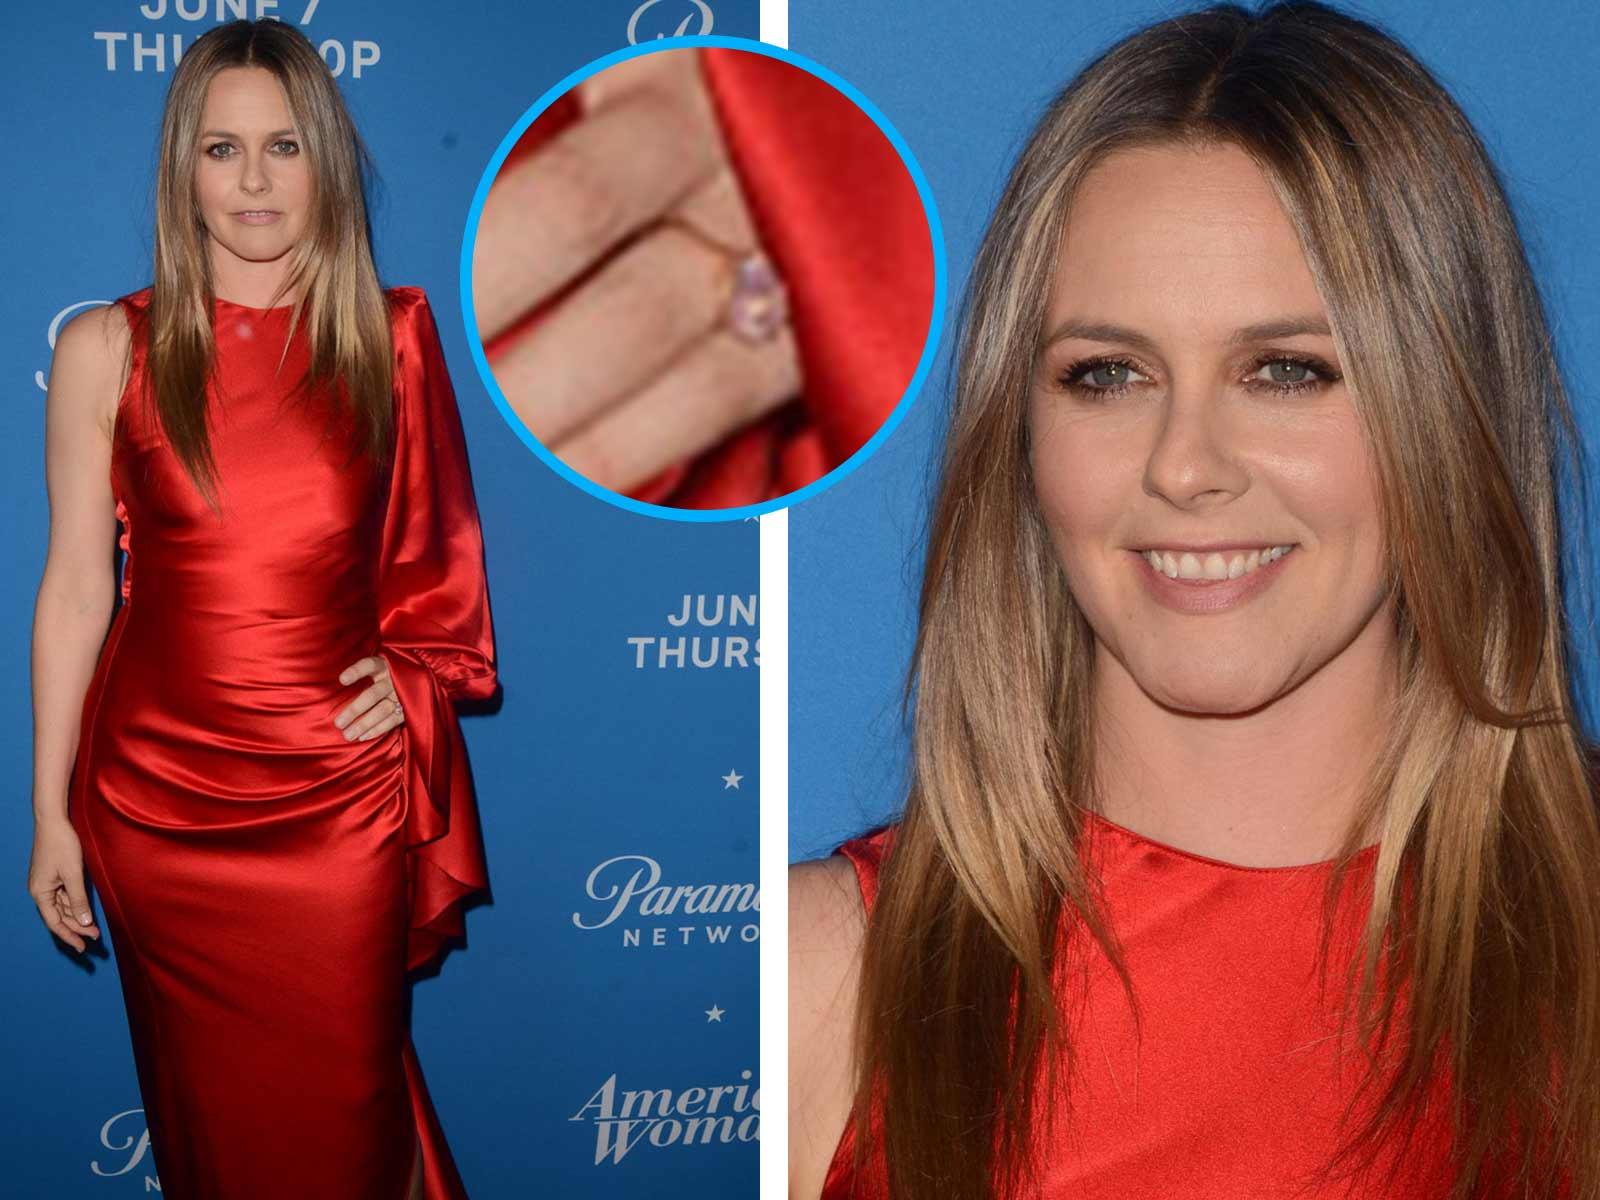 Alicia Silverstone Wearing New Ring at First Appearance Since Filing for Divorce